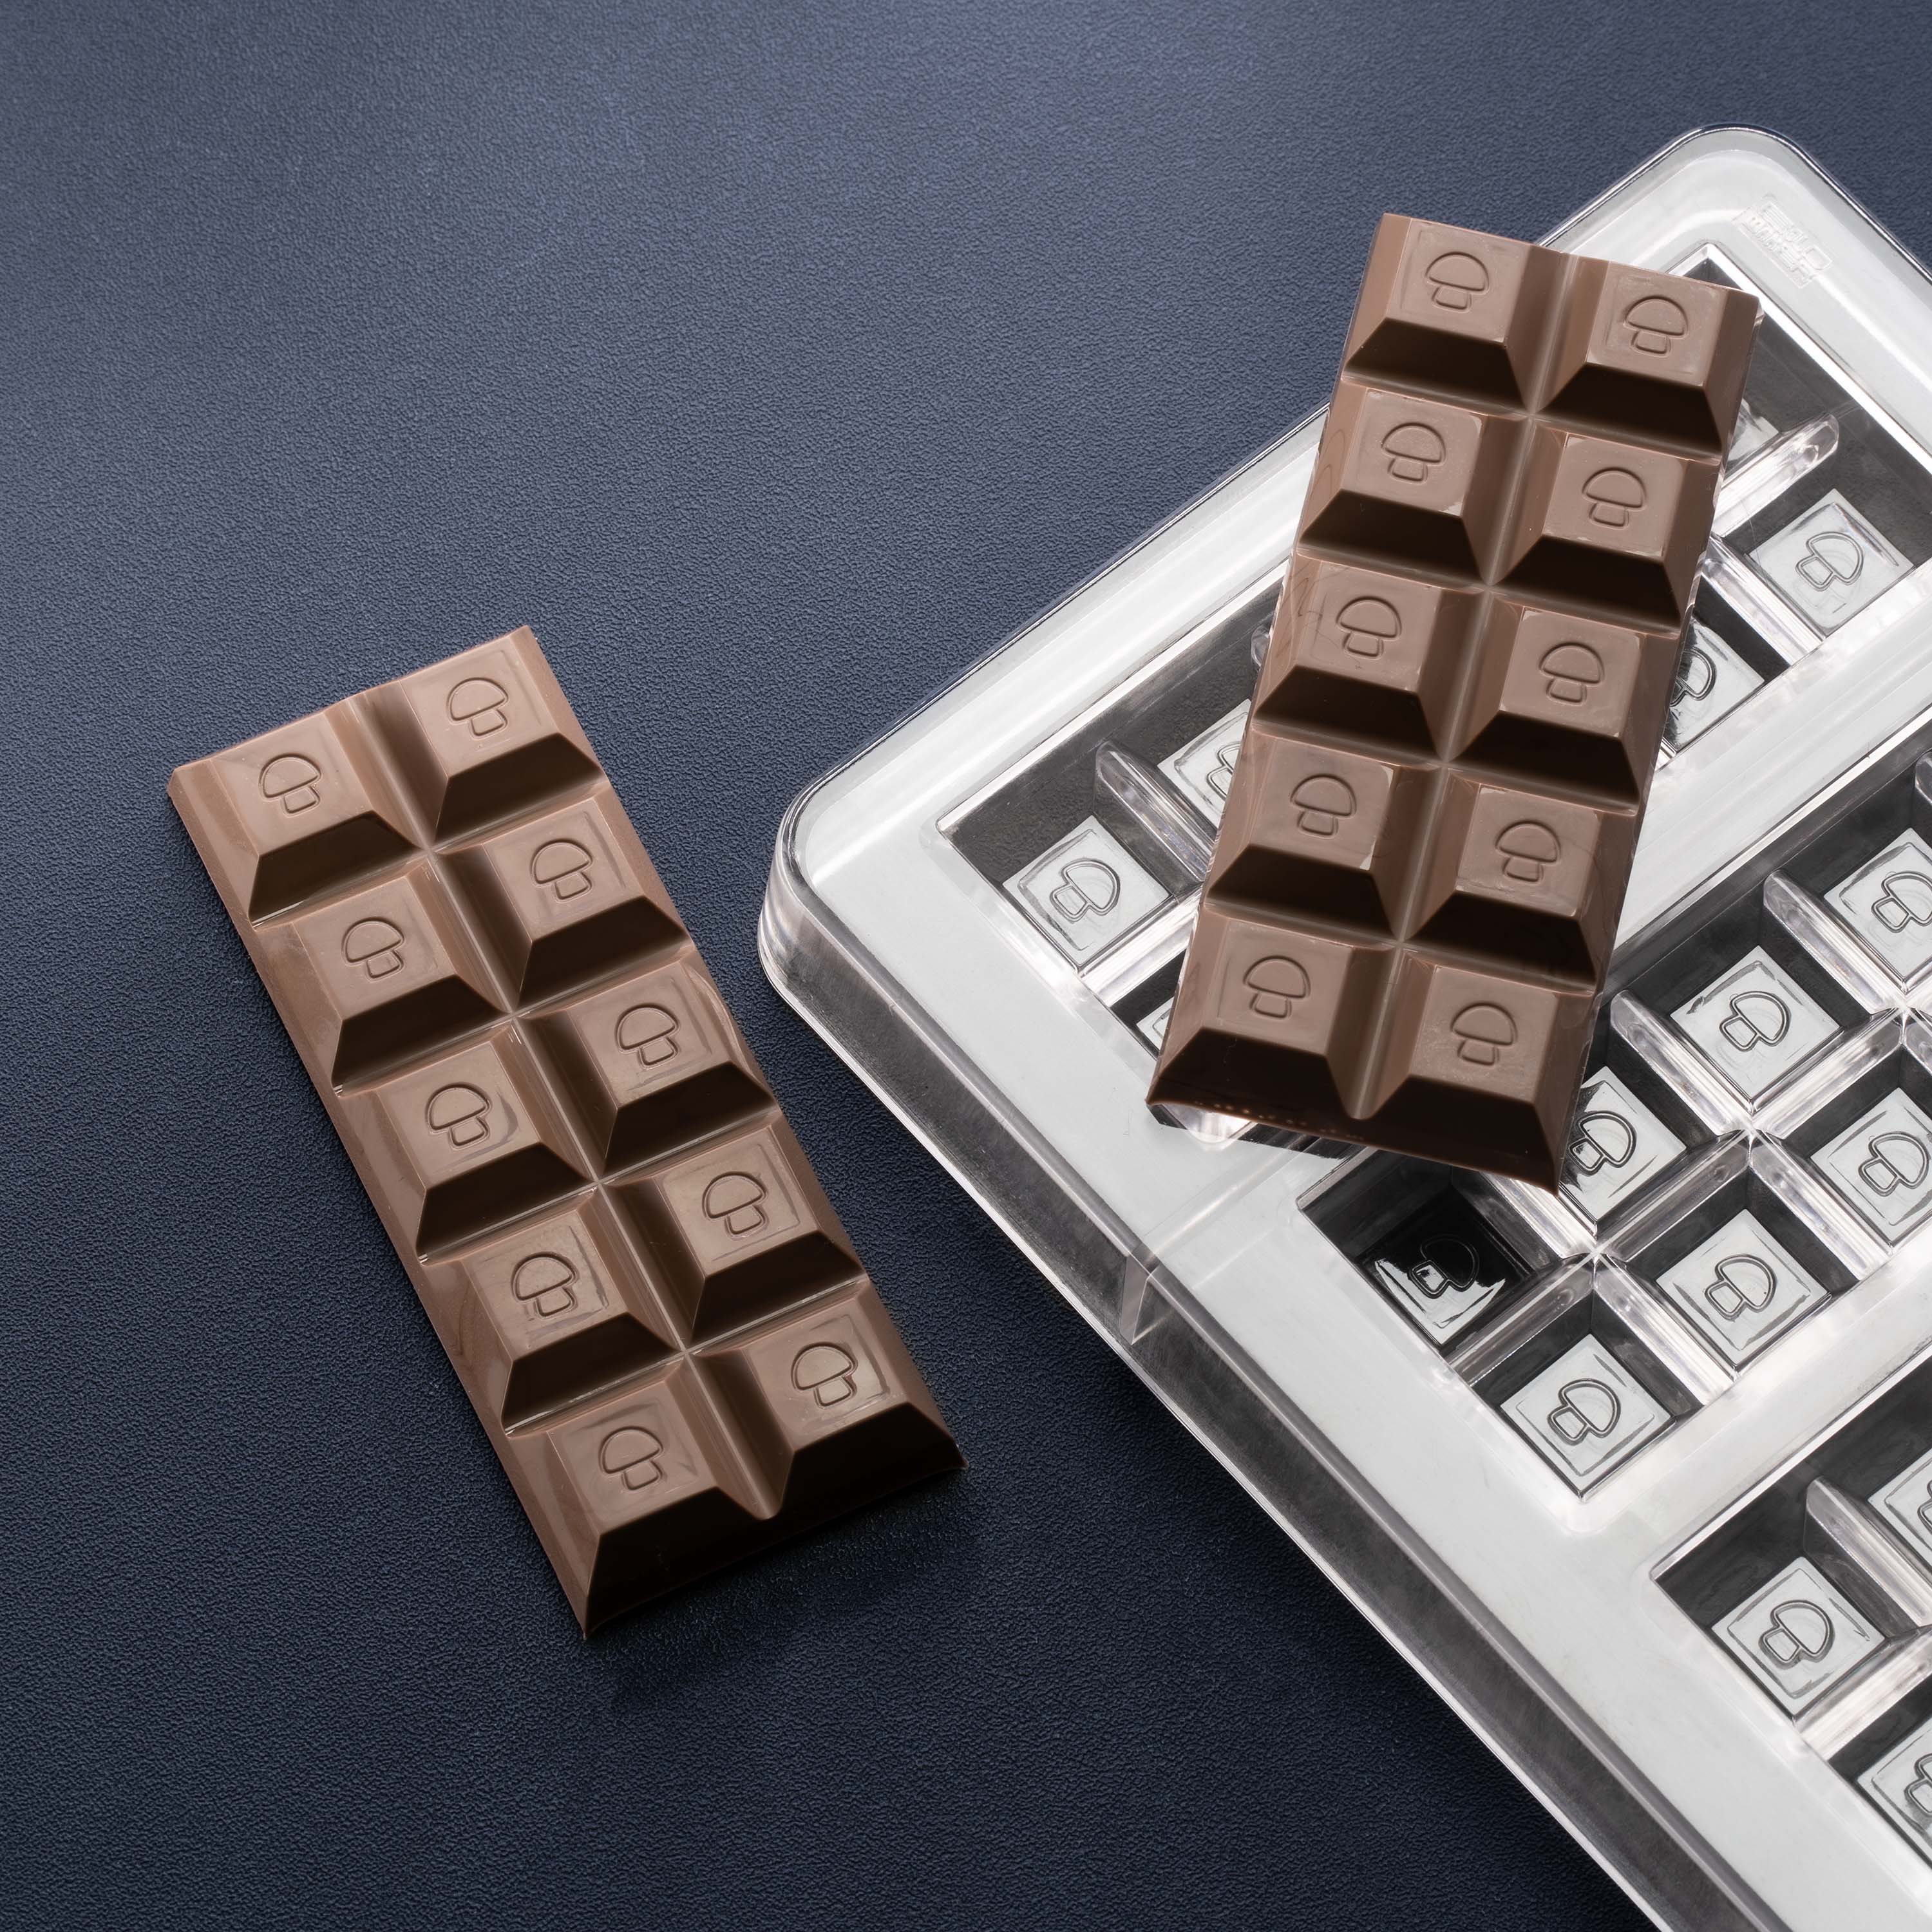 PolkaDot Chocolate Molds: Multiverse, Space Bar Moulds + More